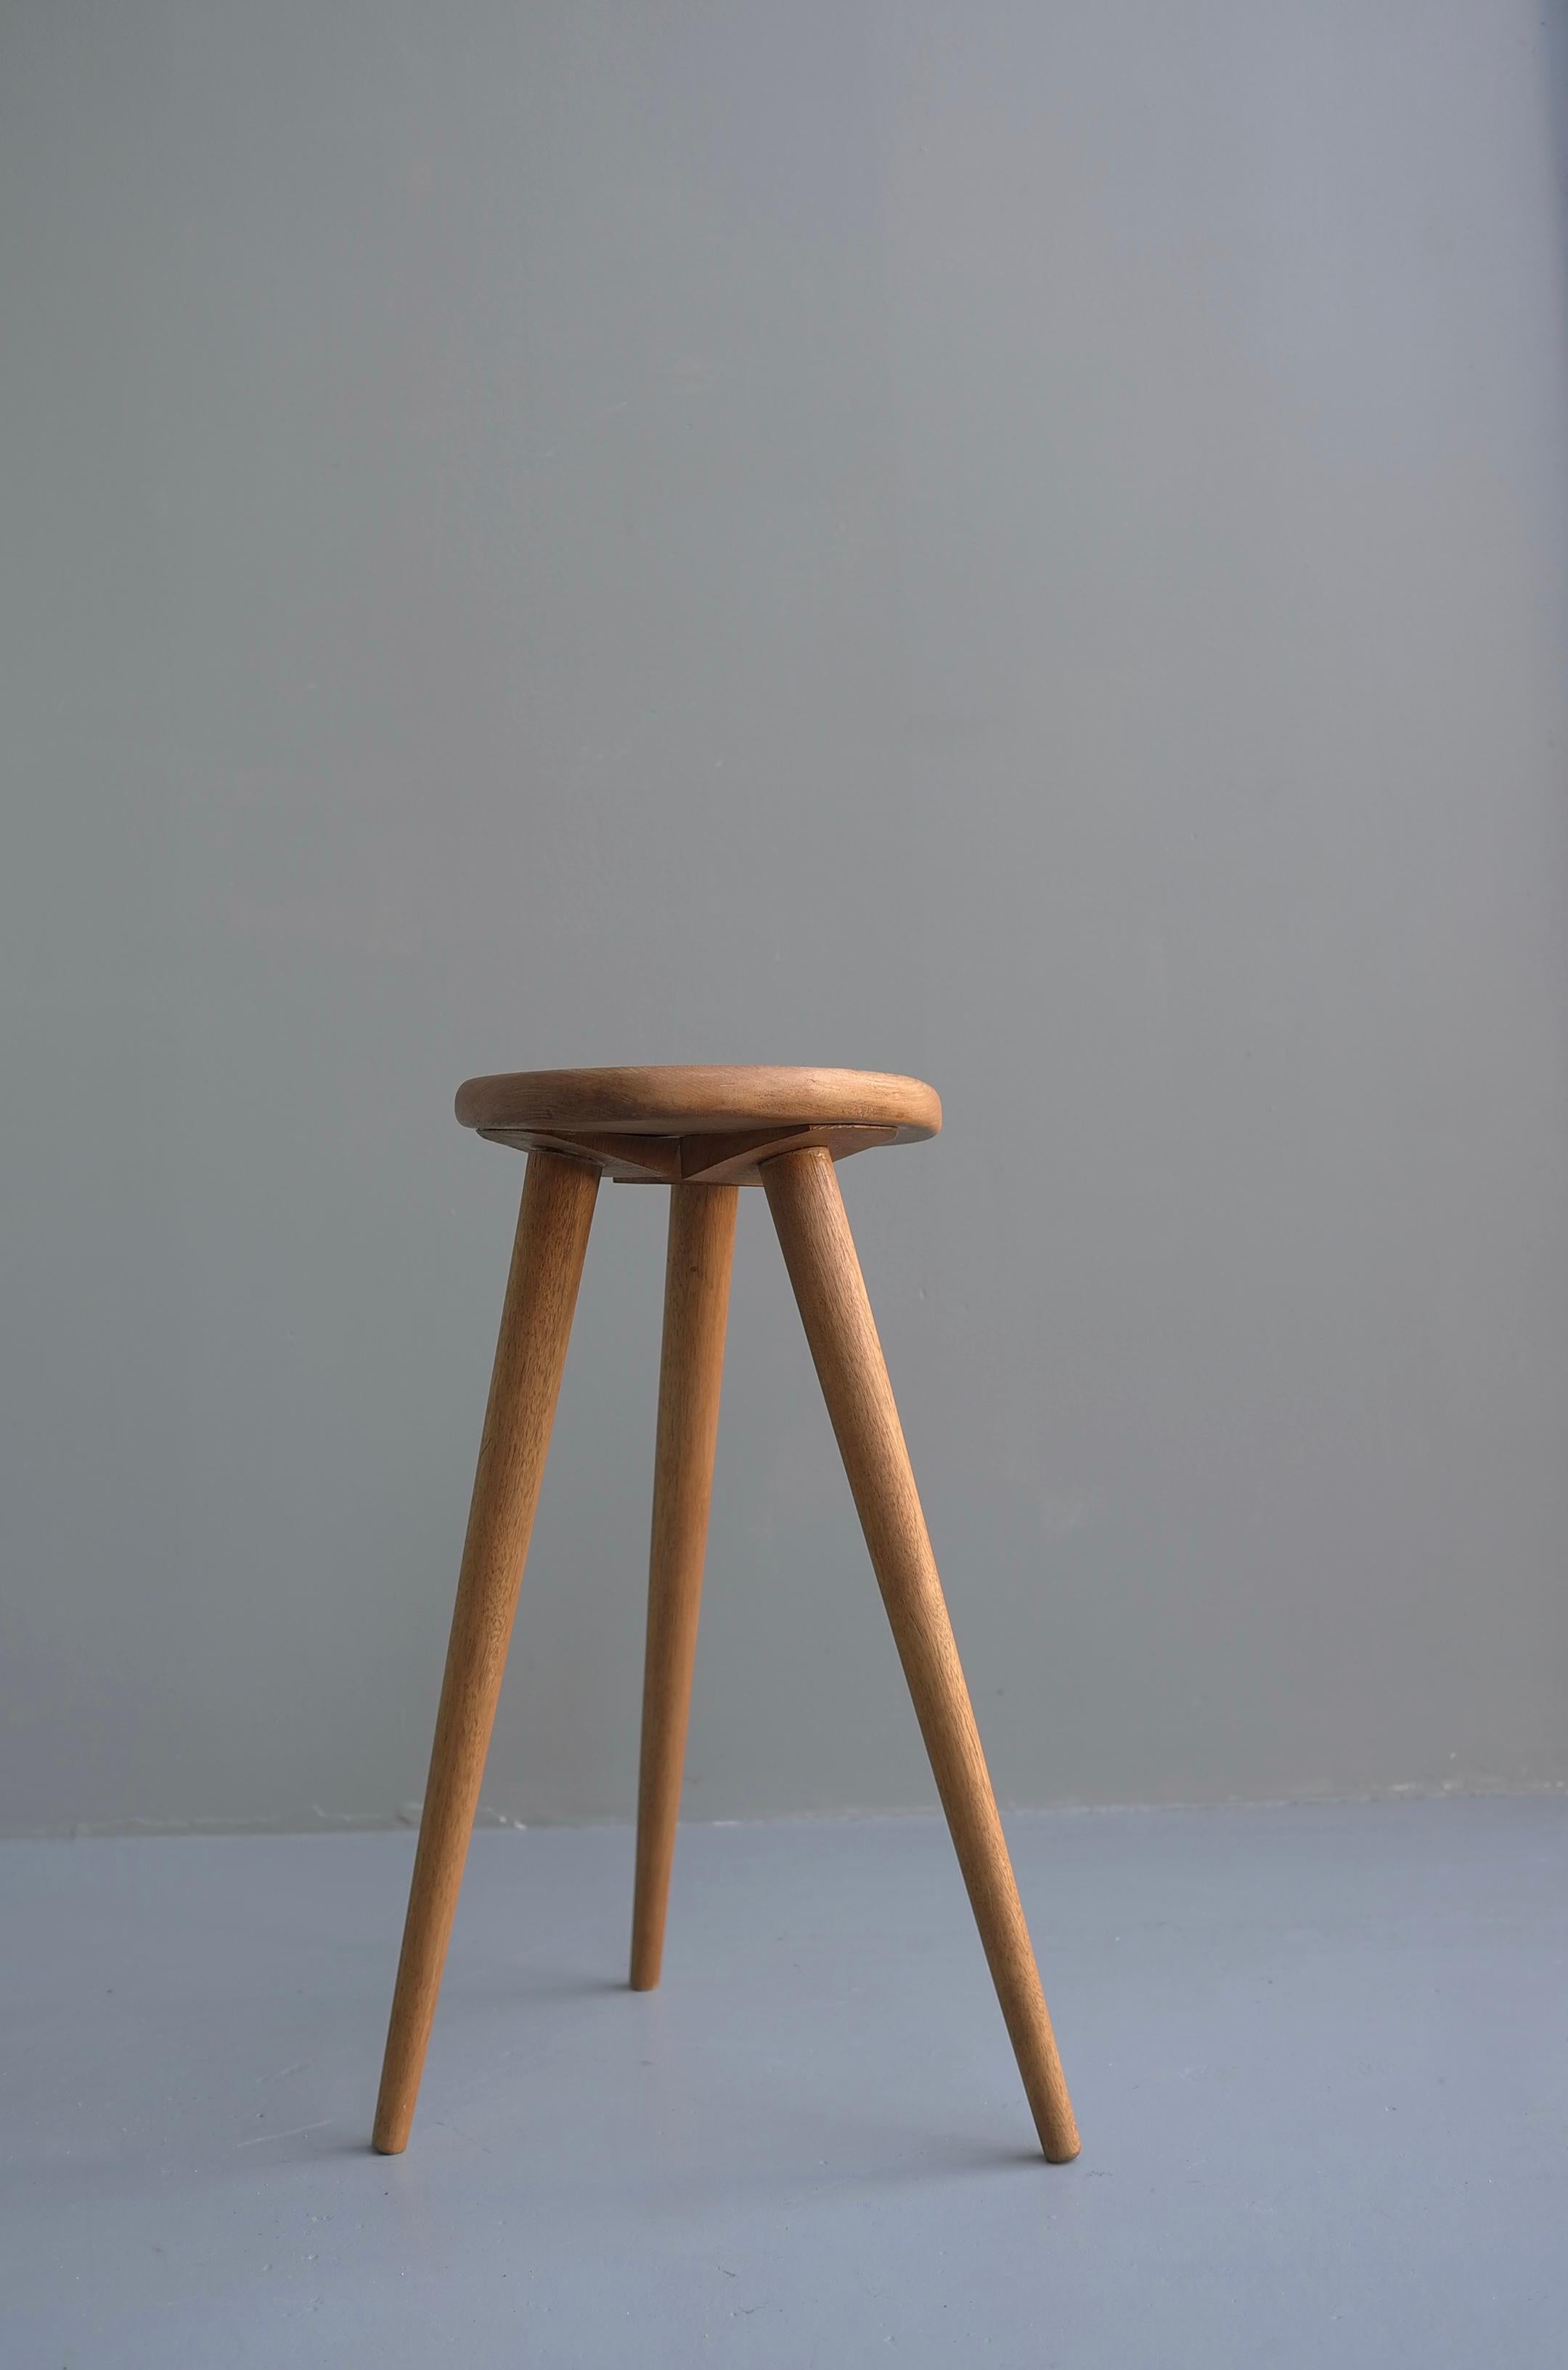 High Elegant Asymmetric Organic Stool in Solid Oak, France, 1950s In Good Condition For Sale In Den Haag, NL